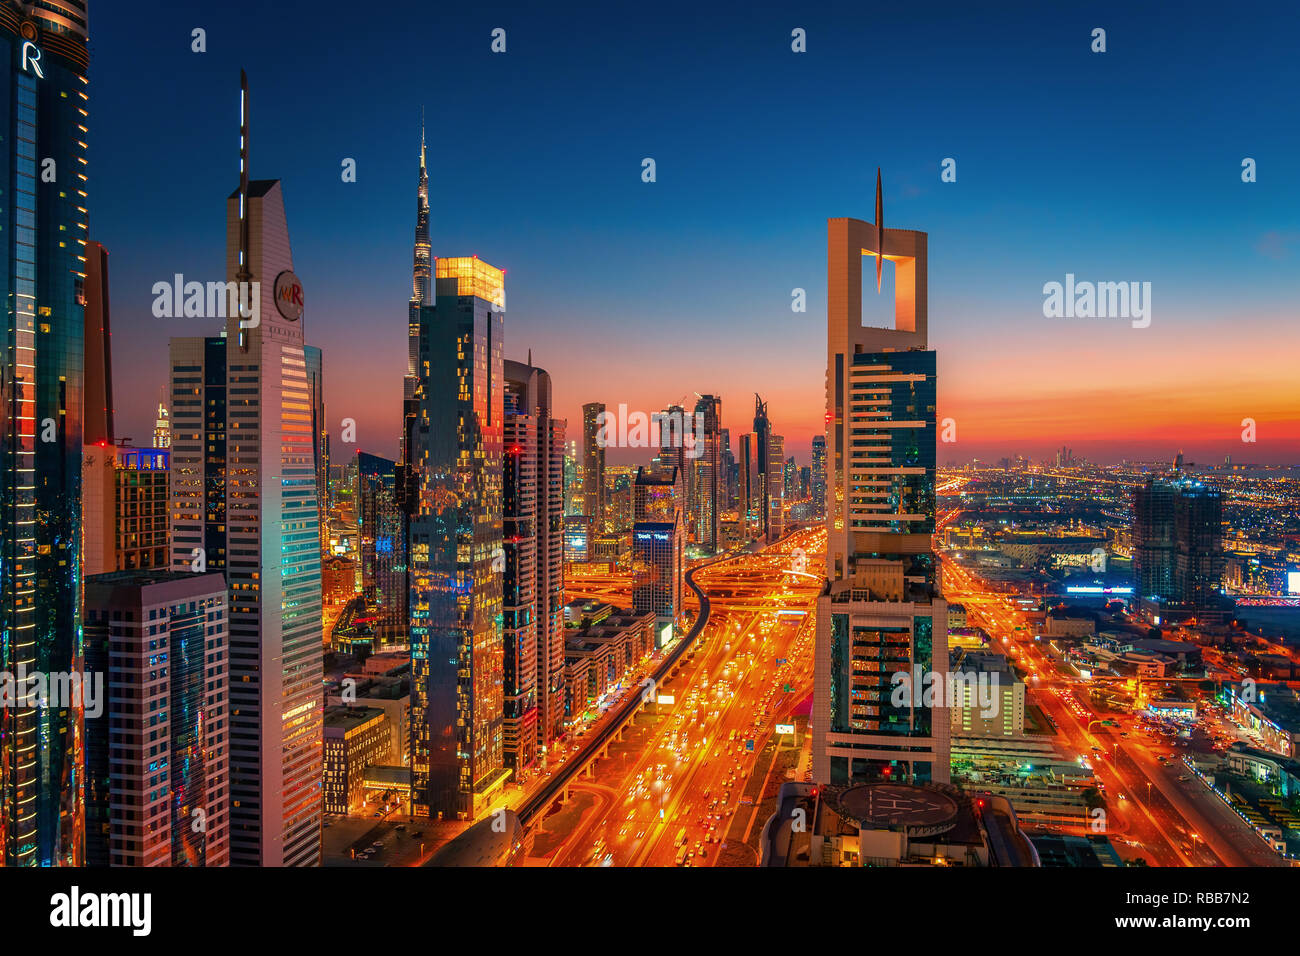 Beautiful rooftop view of Sheikh Zayed Road and skyscrapers in Dubai, United Arab Emirates Stock Photo